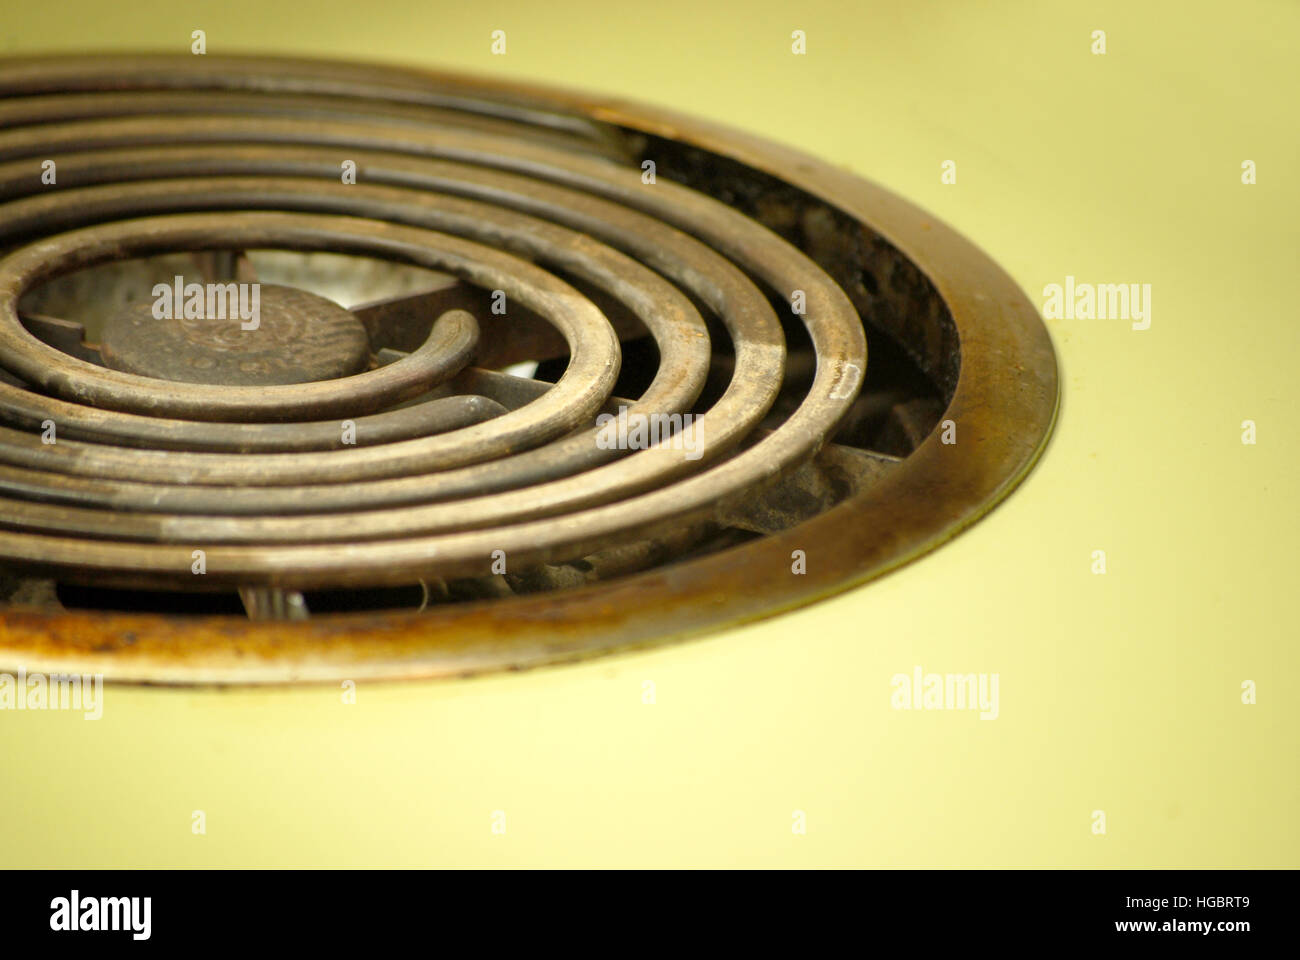 Old Fashioned Puke Green Stove Top Burner Coils Stock Photo